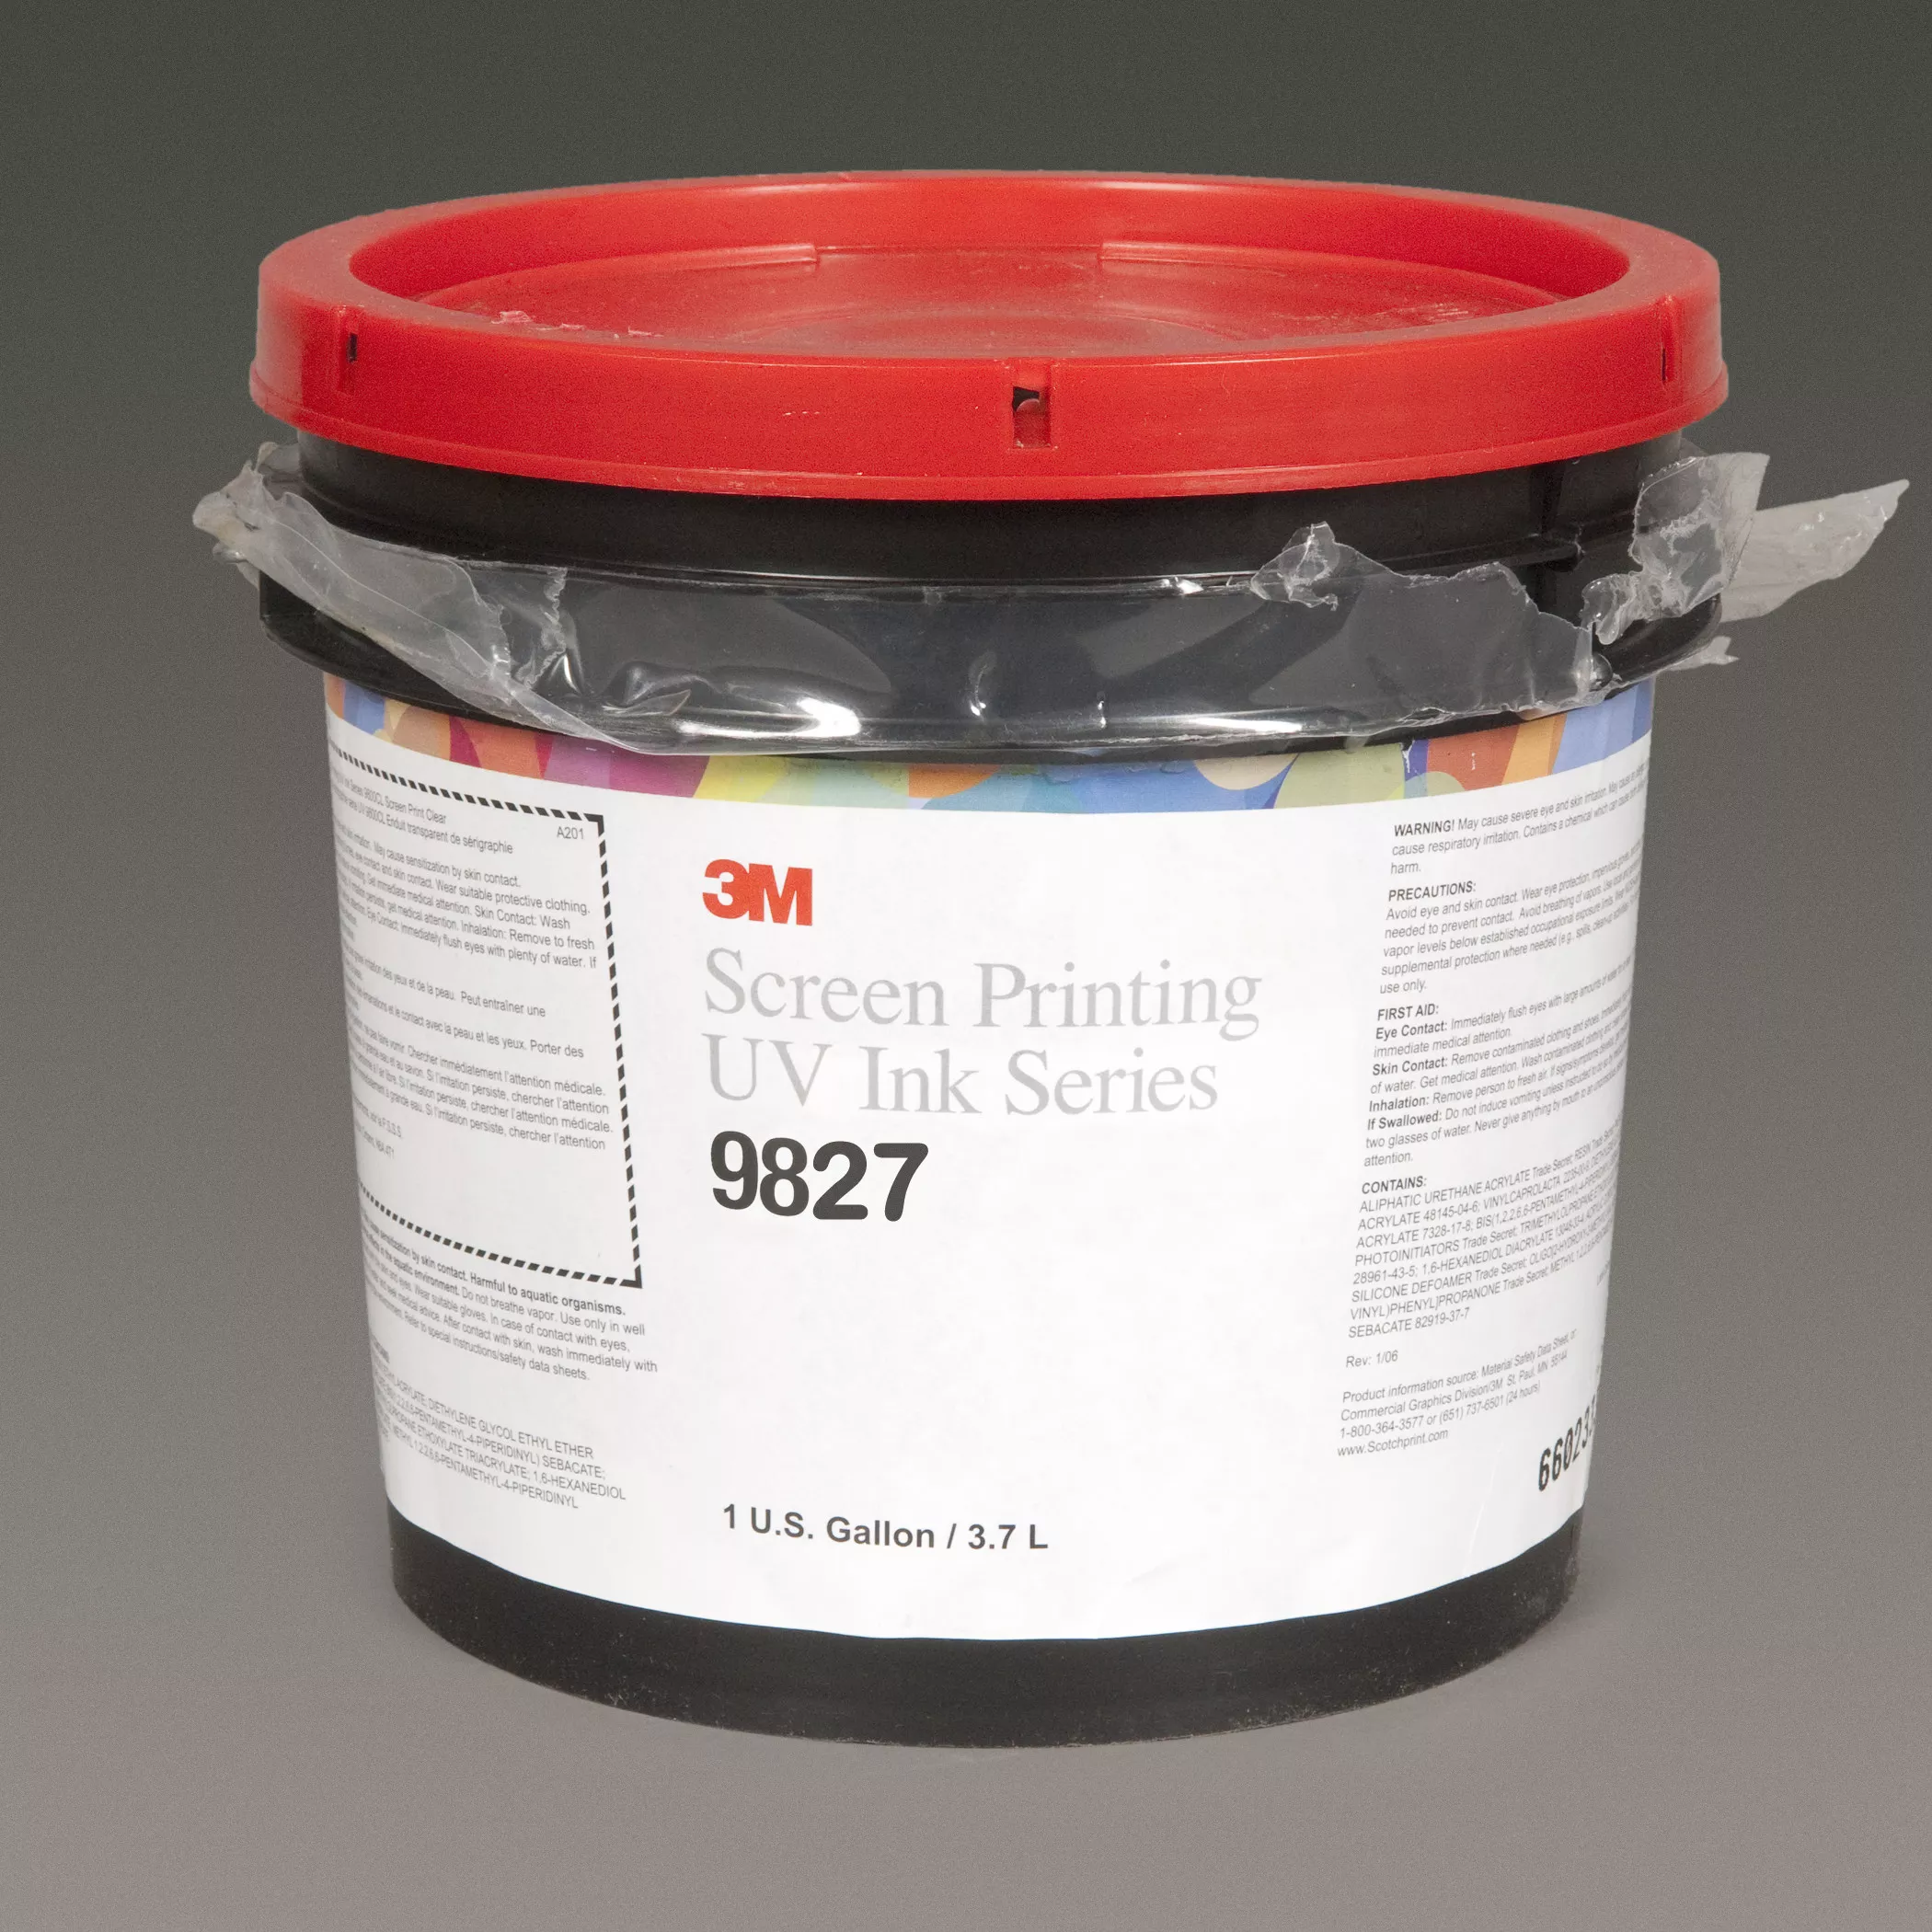 3M™ Screen Printing UV Ink 9827, Red, 1 Gallon Container